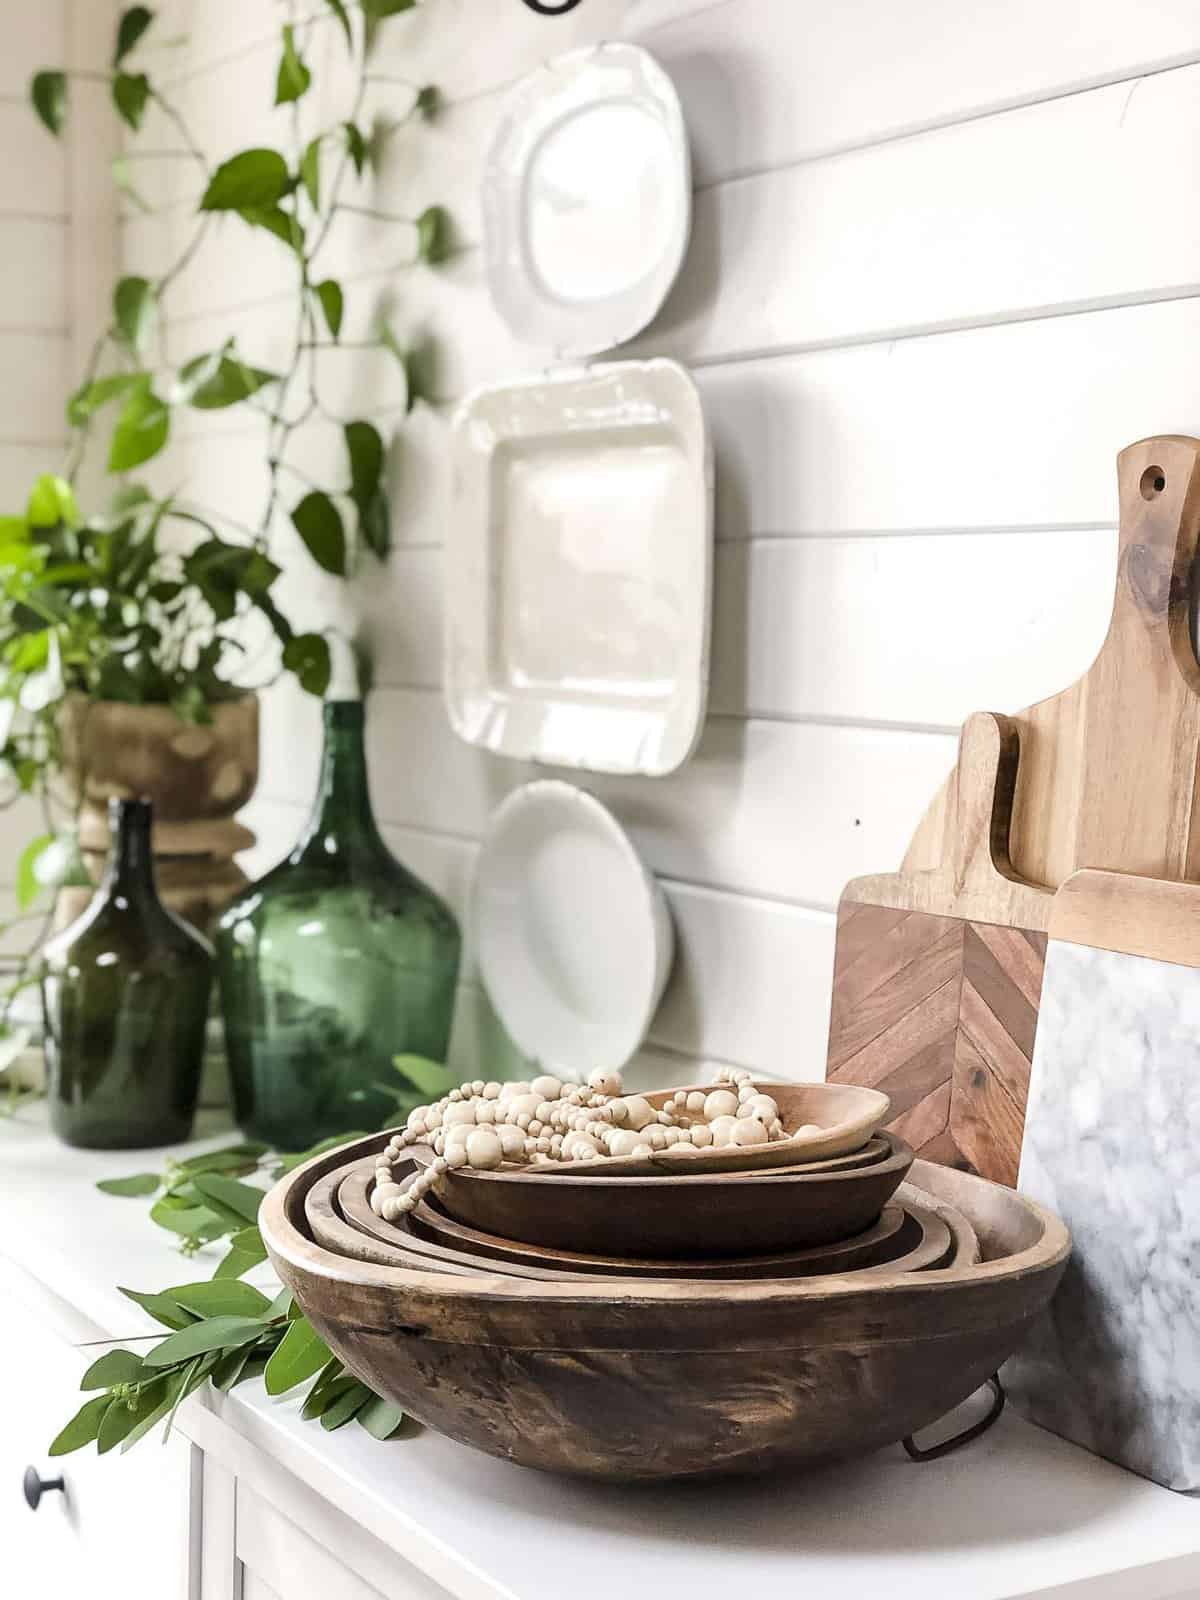 Do you have an eclectic design style like me? Today I'm sharing how I take my spring vintage farmhouse decor and modernize it with a boho twist! #fromhousetohaven #springvintagefarmhousedecor #vintagefarmhouse #bohofarmhouse